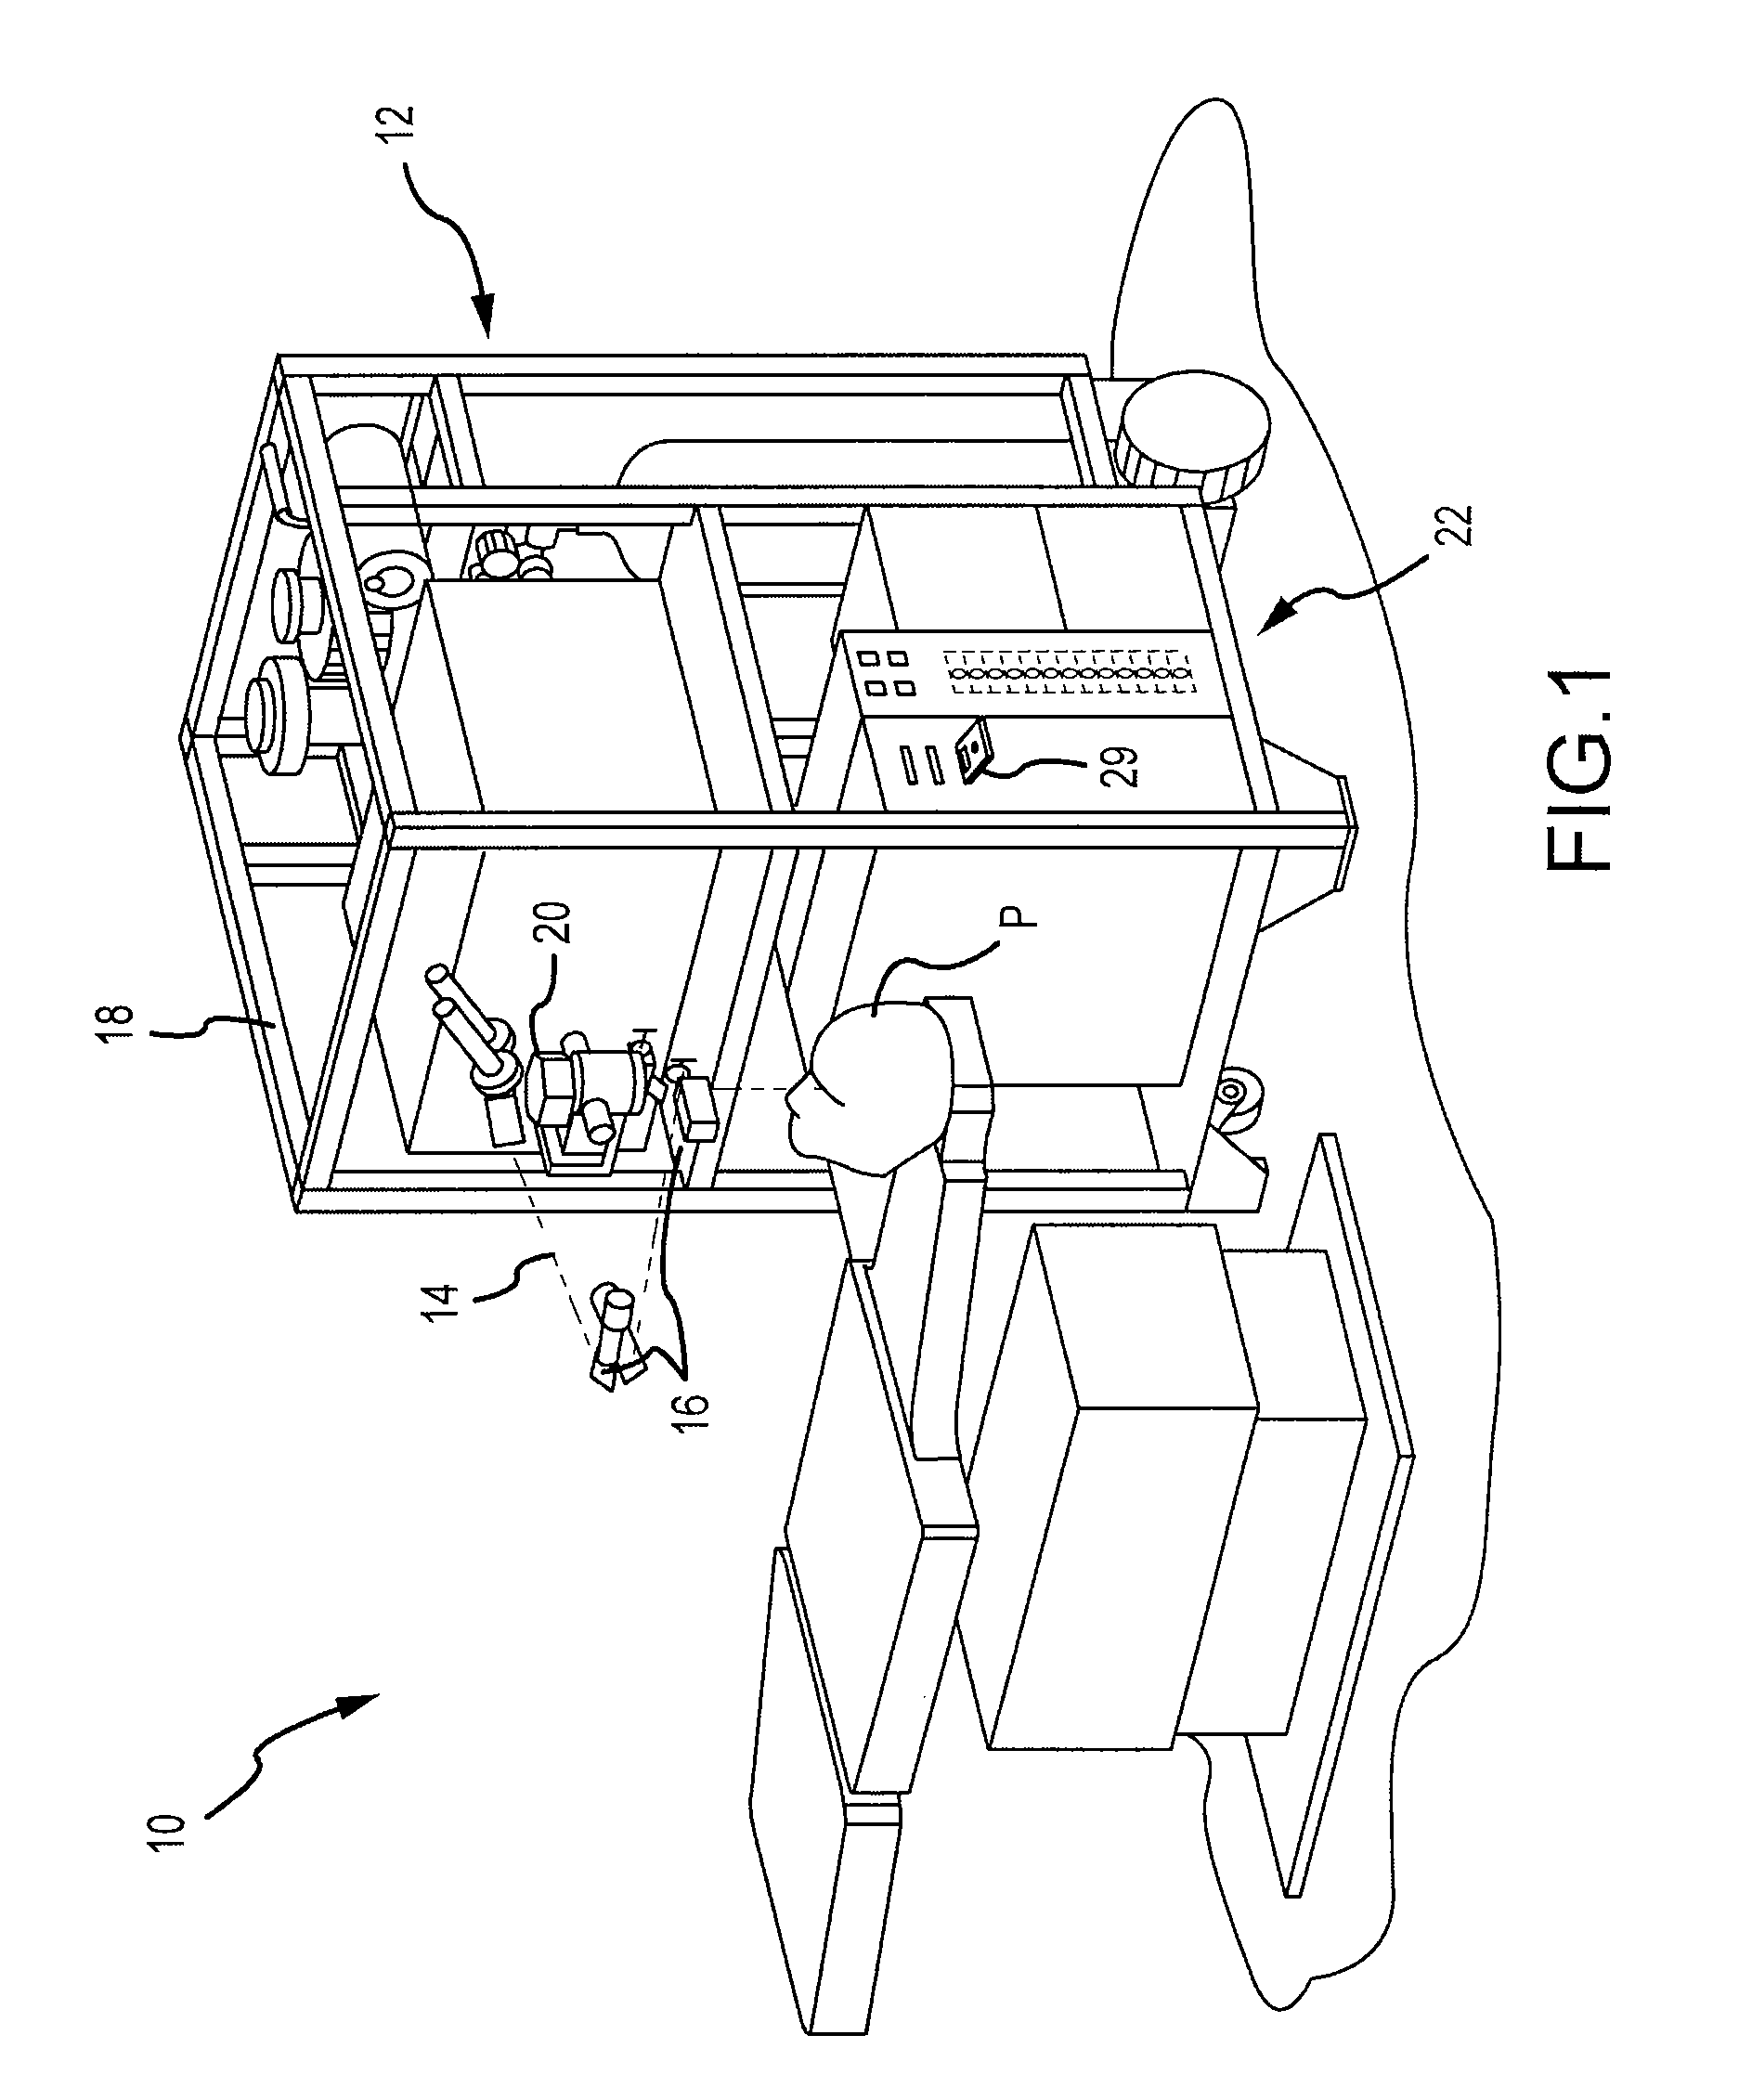 Accommodation compensation systems and methods